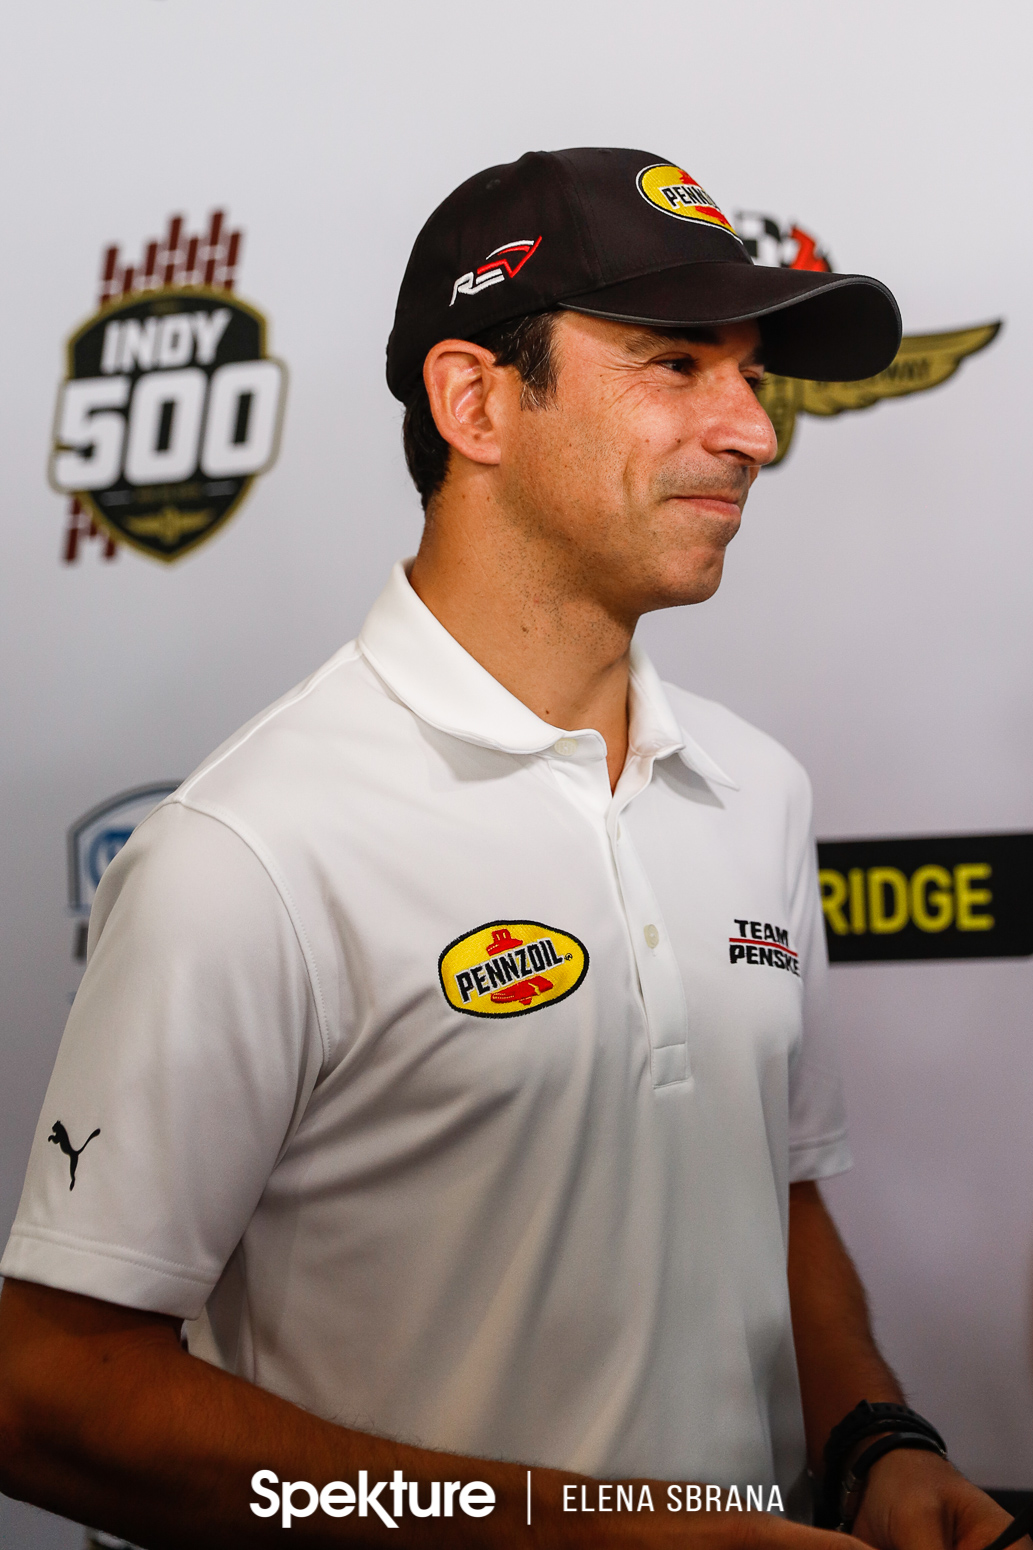 Earchphoto Sports - Helio Castroneves speaks to reporters during media day at IMS